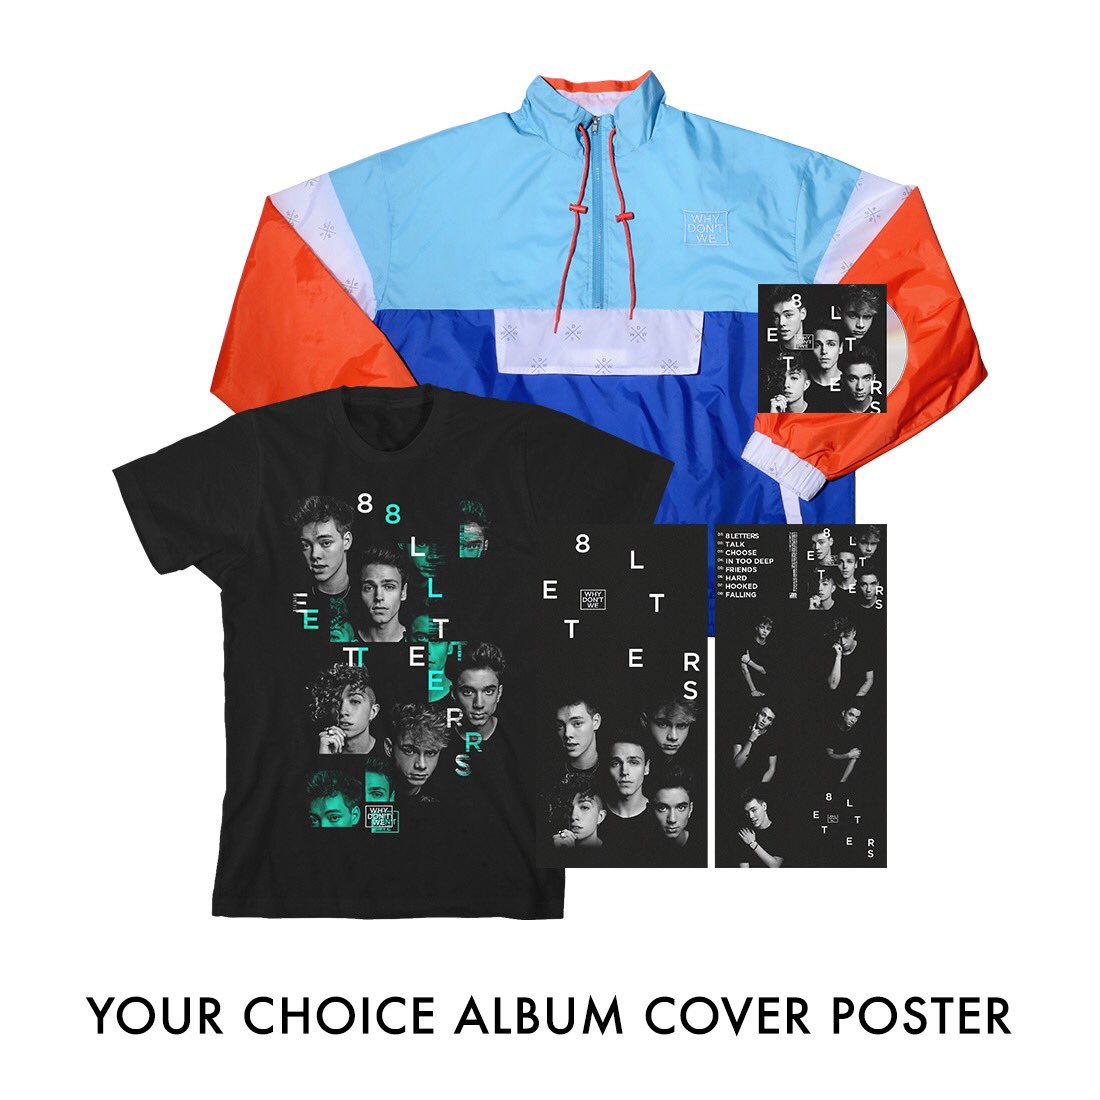 Limited edition pre-order bundles are up now! #8Letters whydntwe.co/newmerch